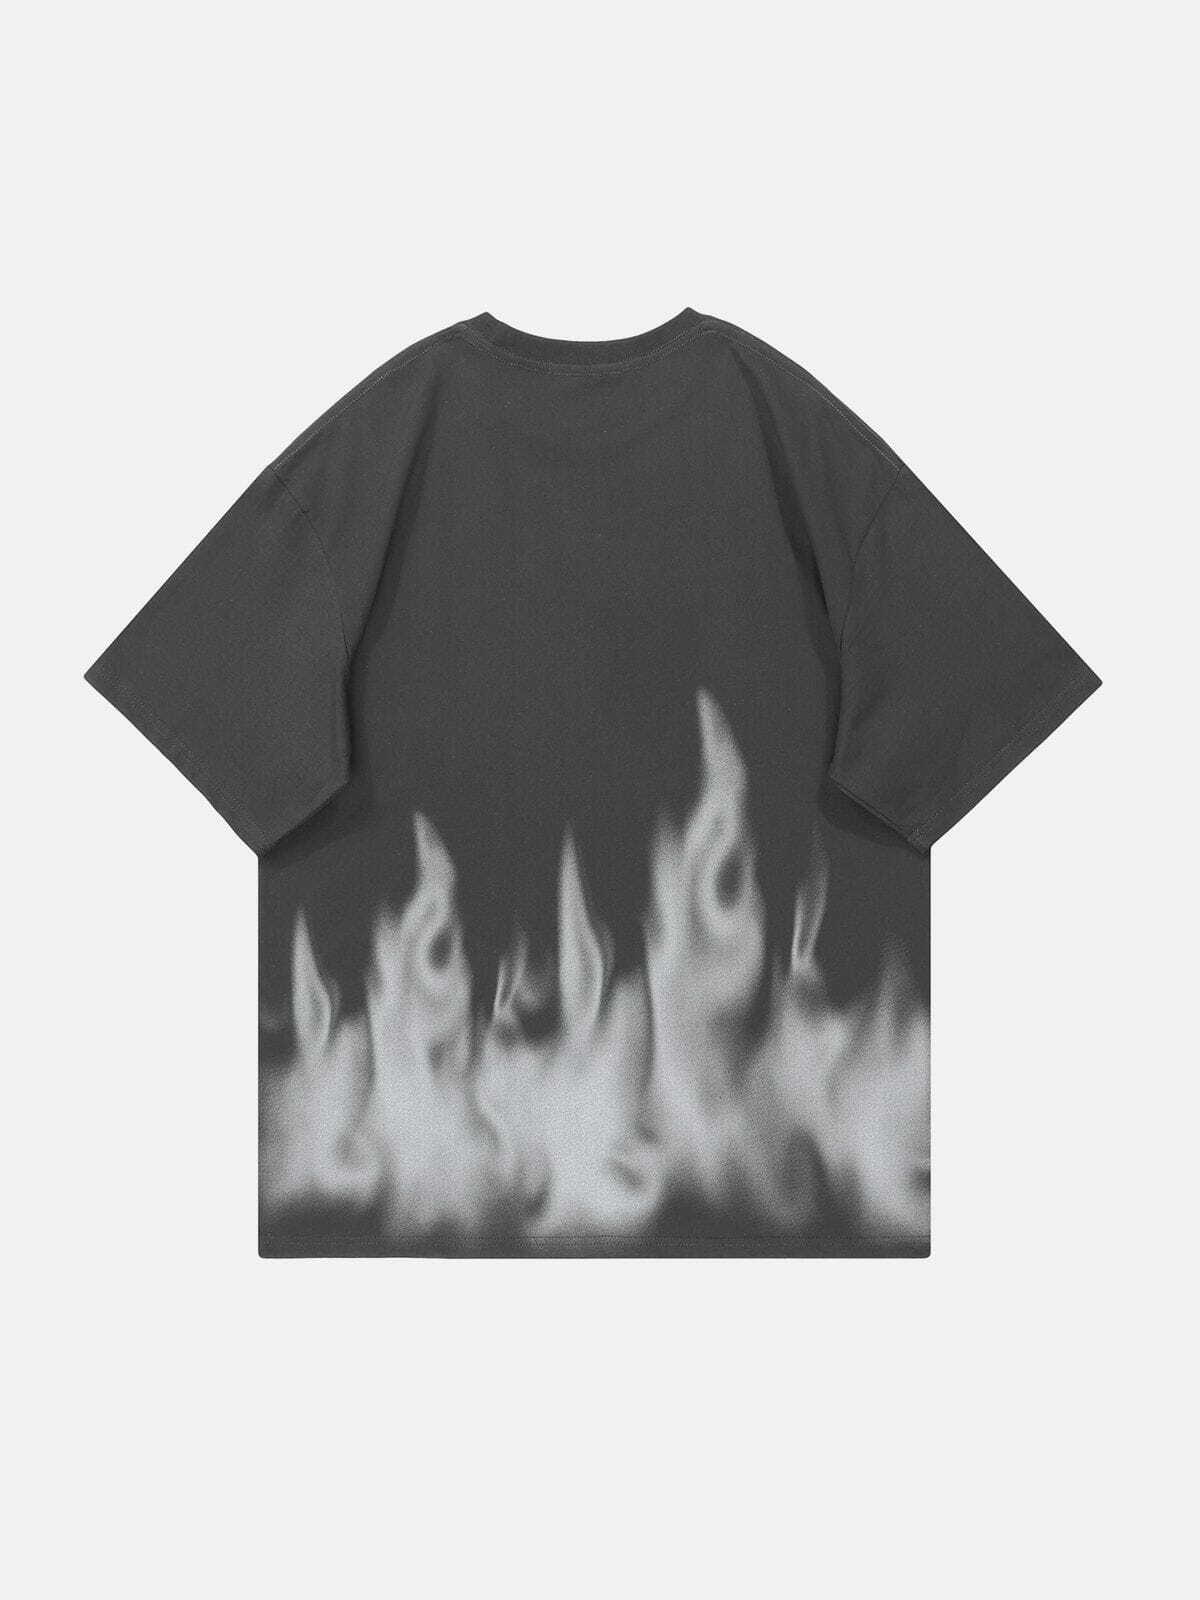 gothic flame letter graphic tee edgy & vibrant streetwear 2555